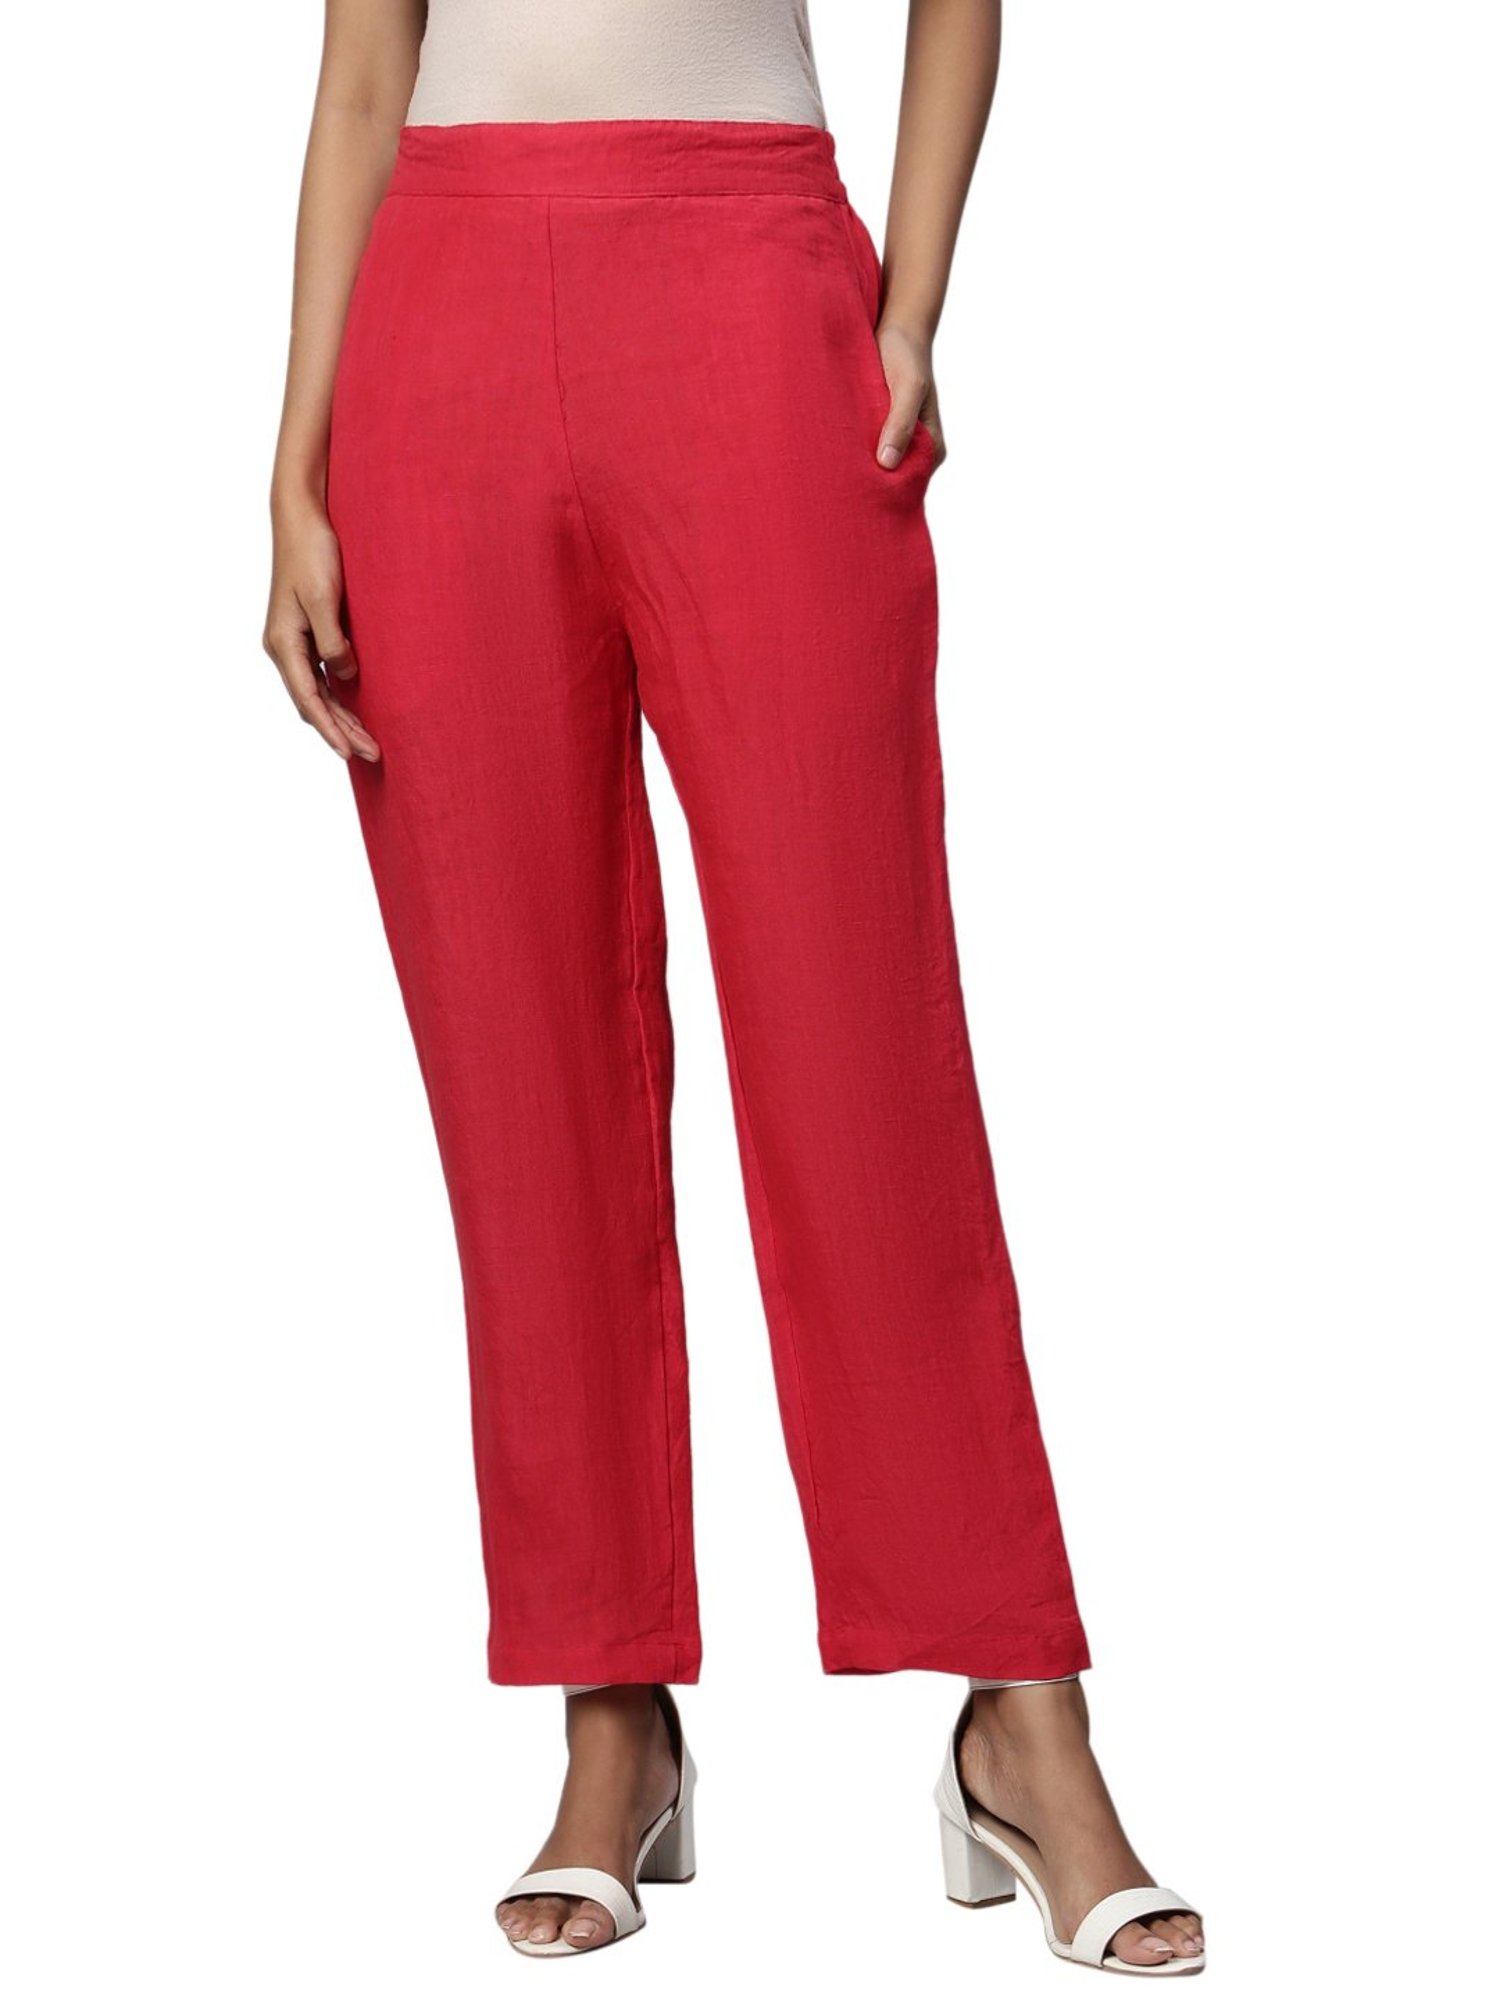 Women's linen trousers - linen clothes in Naturally Podlasek | Cracow